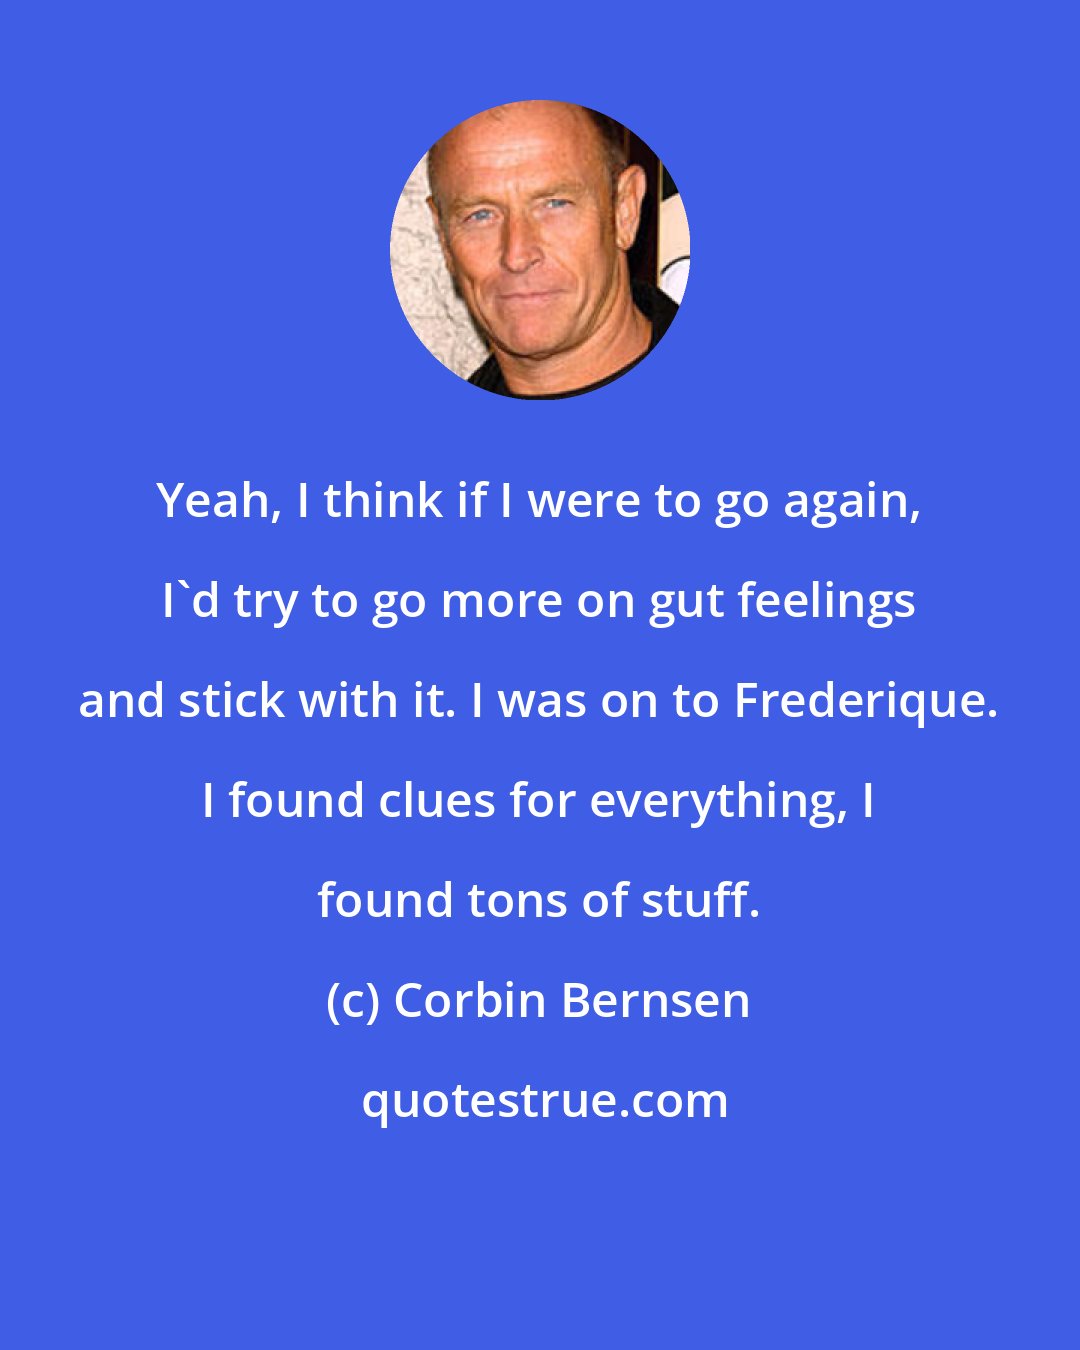 Corbin Bernsen: Yeah, I think if I were to go again, I'd try to go more on gut feelings and stick with it. I was on to Frederique. I found clues for everything, I found tons of stuff.